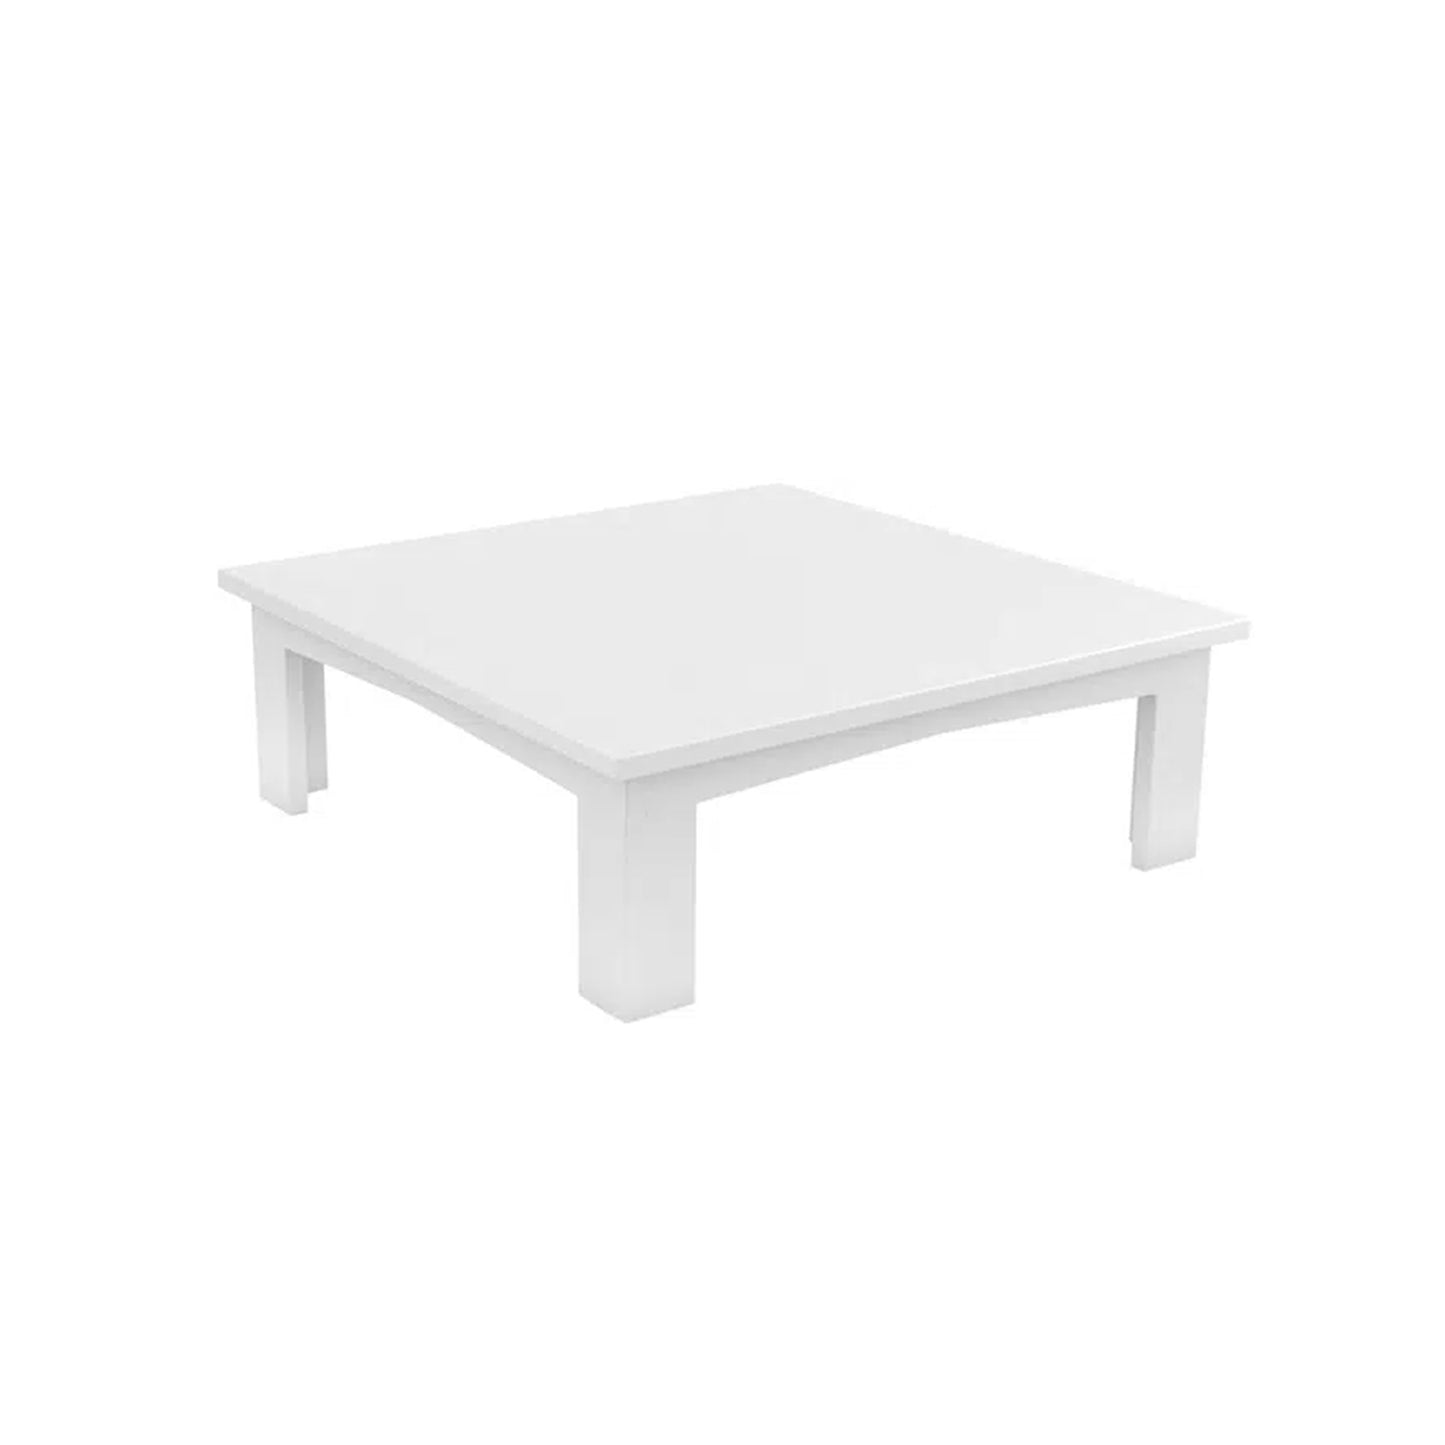 Ledge Lounger Mainstay Square Coffee Table